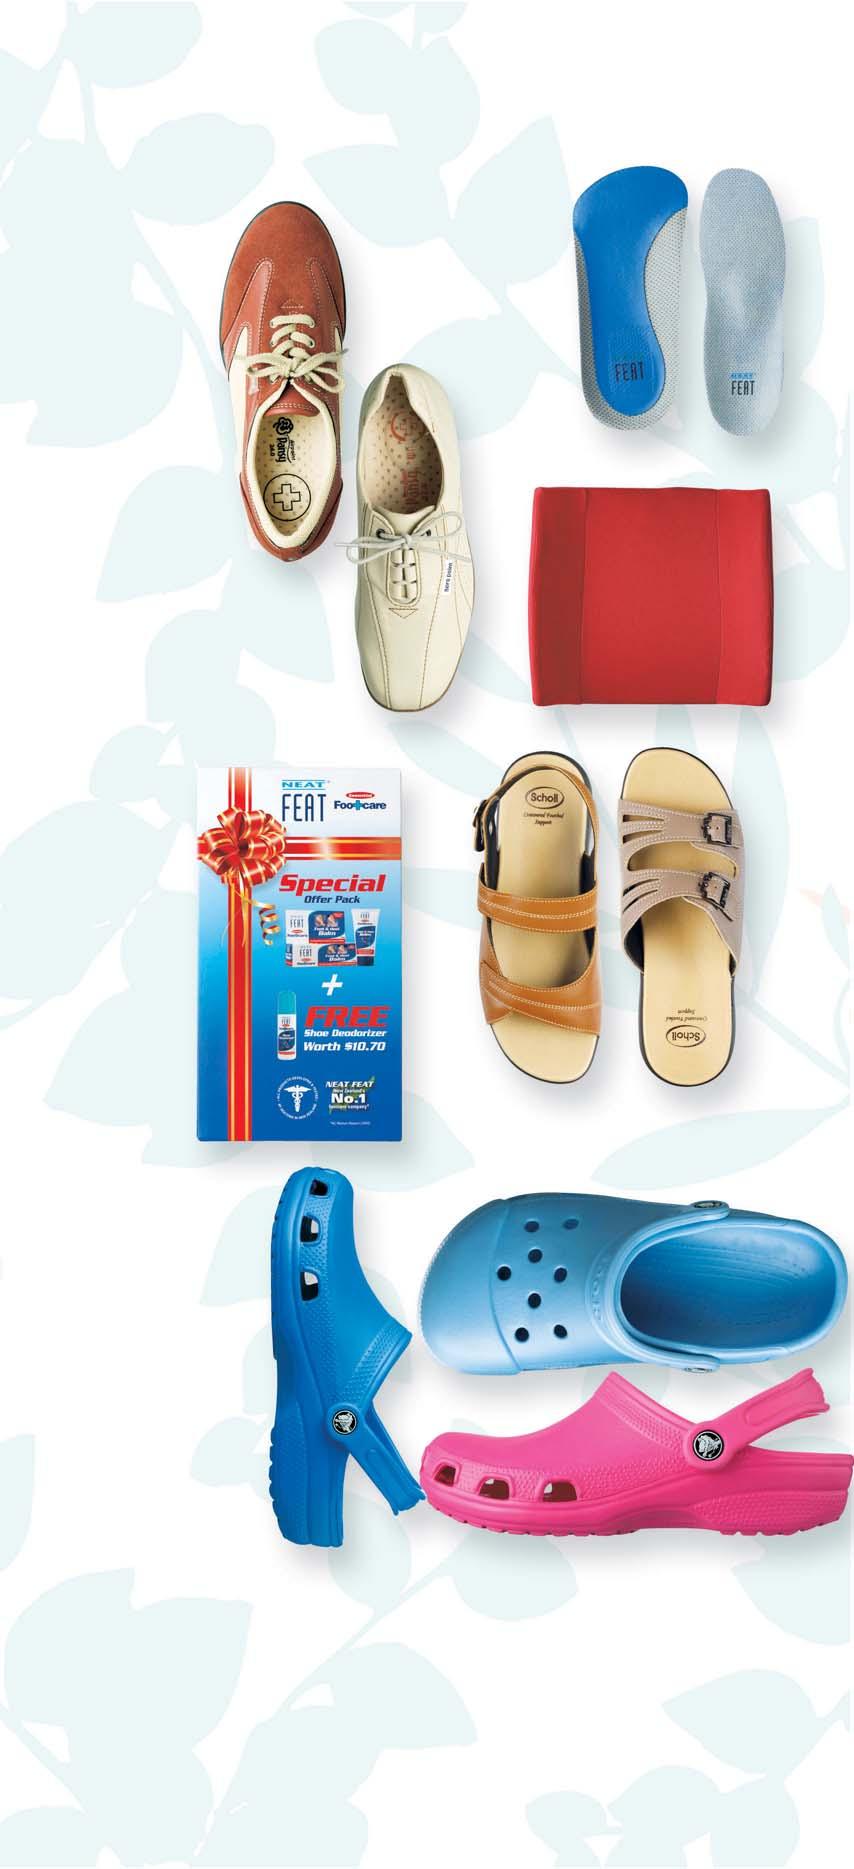 More comfort 1 HS Pansy Limited Edition Tote Bag Neat Feat Foot Powder 30g worth $5 with purchase of any Neat Feat Orthotics Product 3 HS 2 4 Up to 33% 6 HS 5 HS 10% Crocs Rx Limited Edition Tote Bag